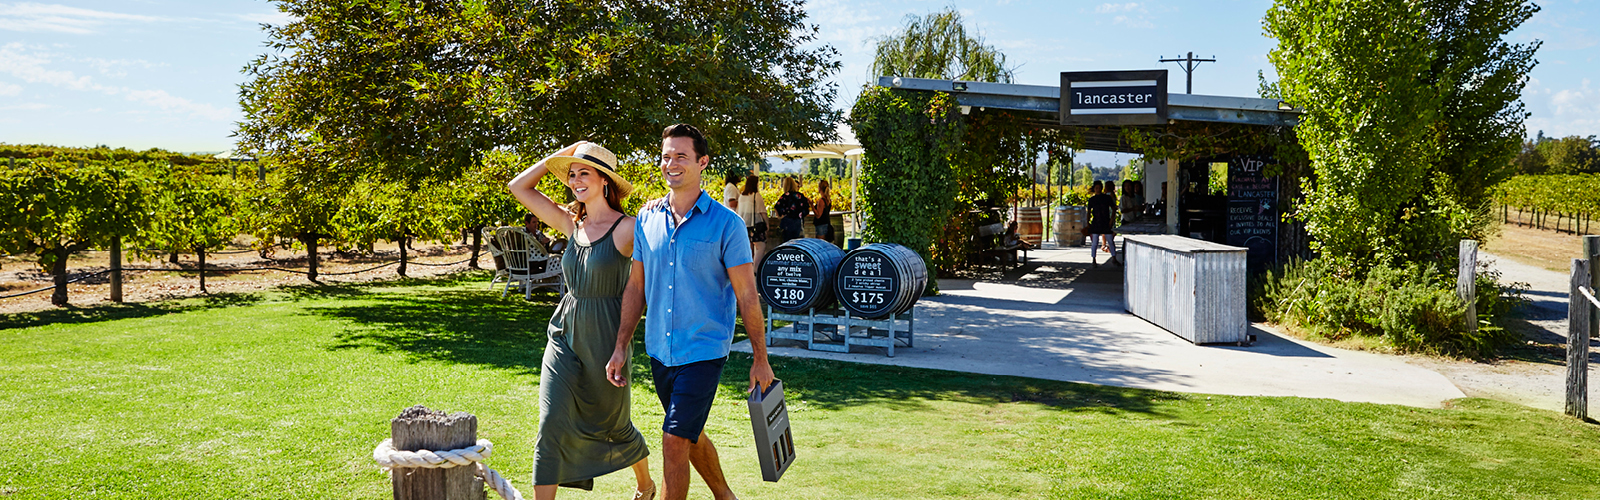 5-Night-Perth-and-Surrounds